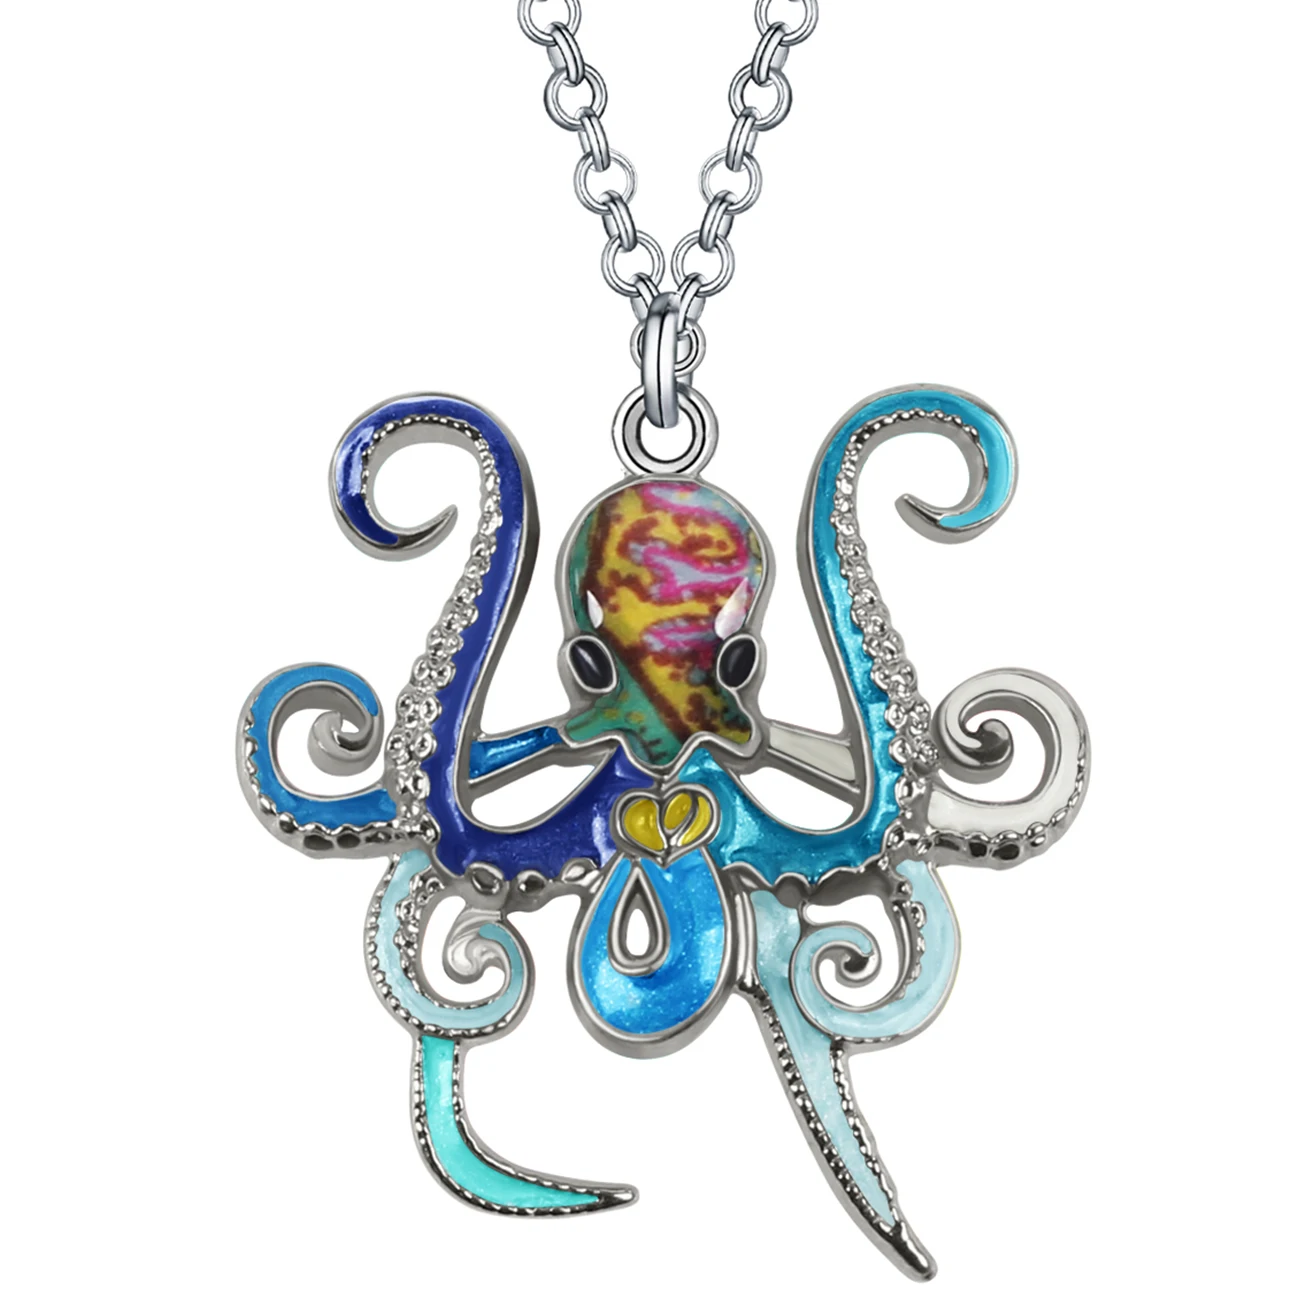 

Arwa Enamel Alloy Floral Cute Ocean Huge Squid Octopus Necklace Pendant Chain Gifts Fashion Jewelry for Women Teen Party Favors